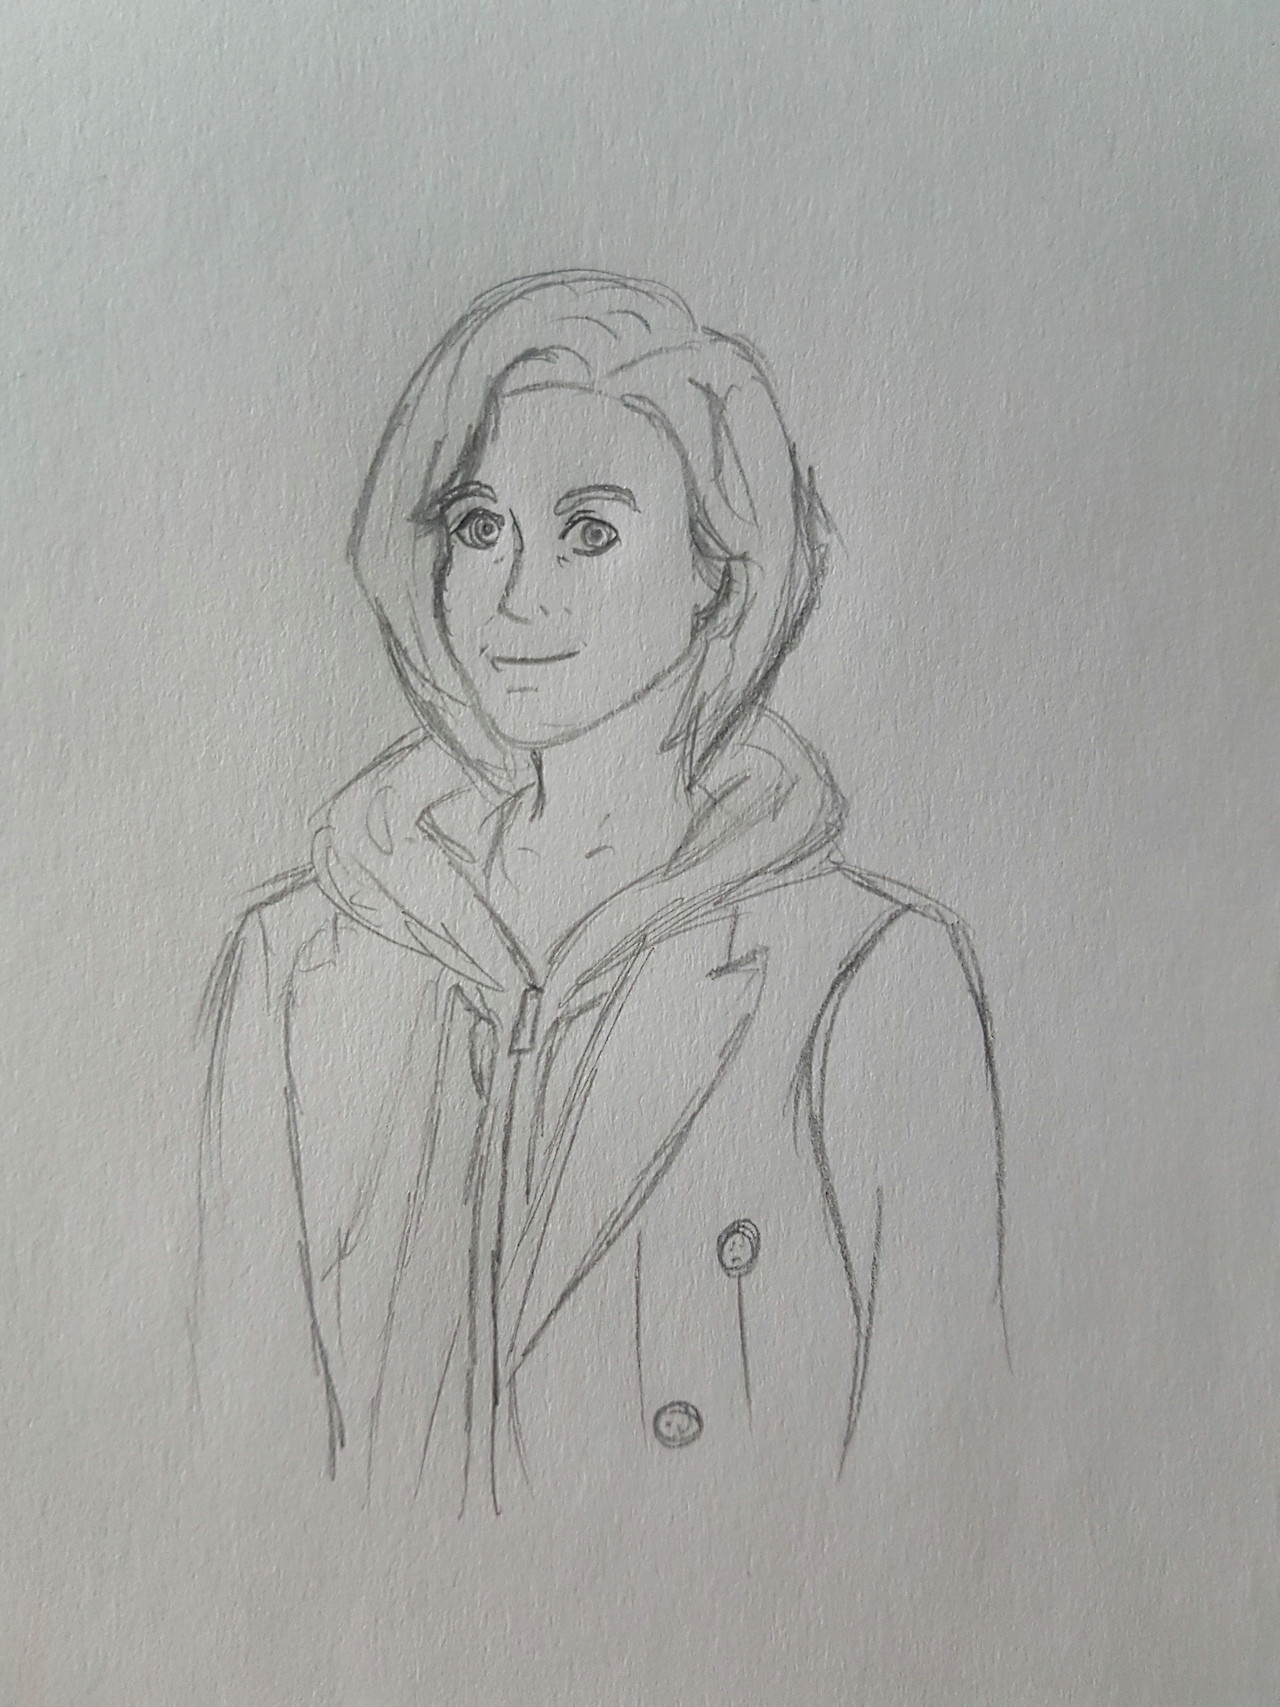 Drawing Of Girl Doctor 13th Doctor Fanart the Thirteenth Doctor Pinterest Fanart and